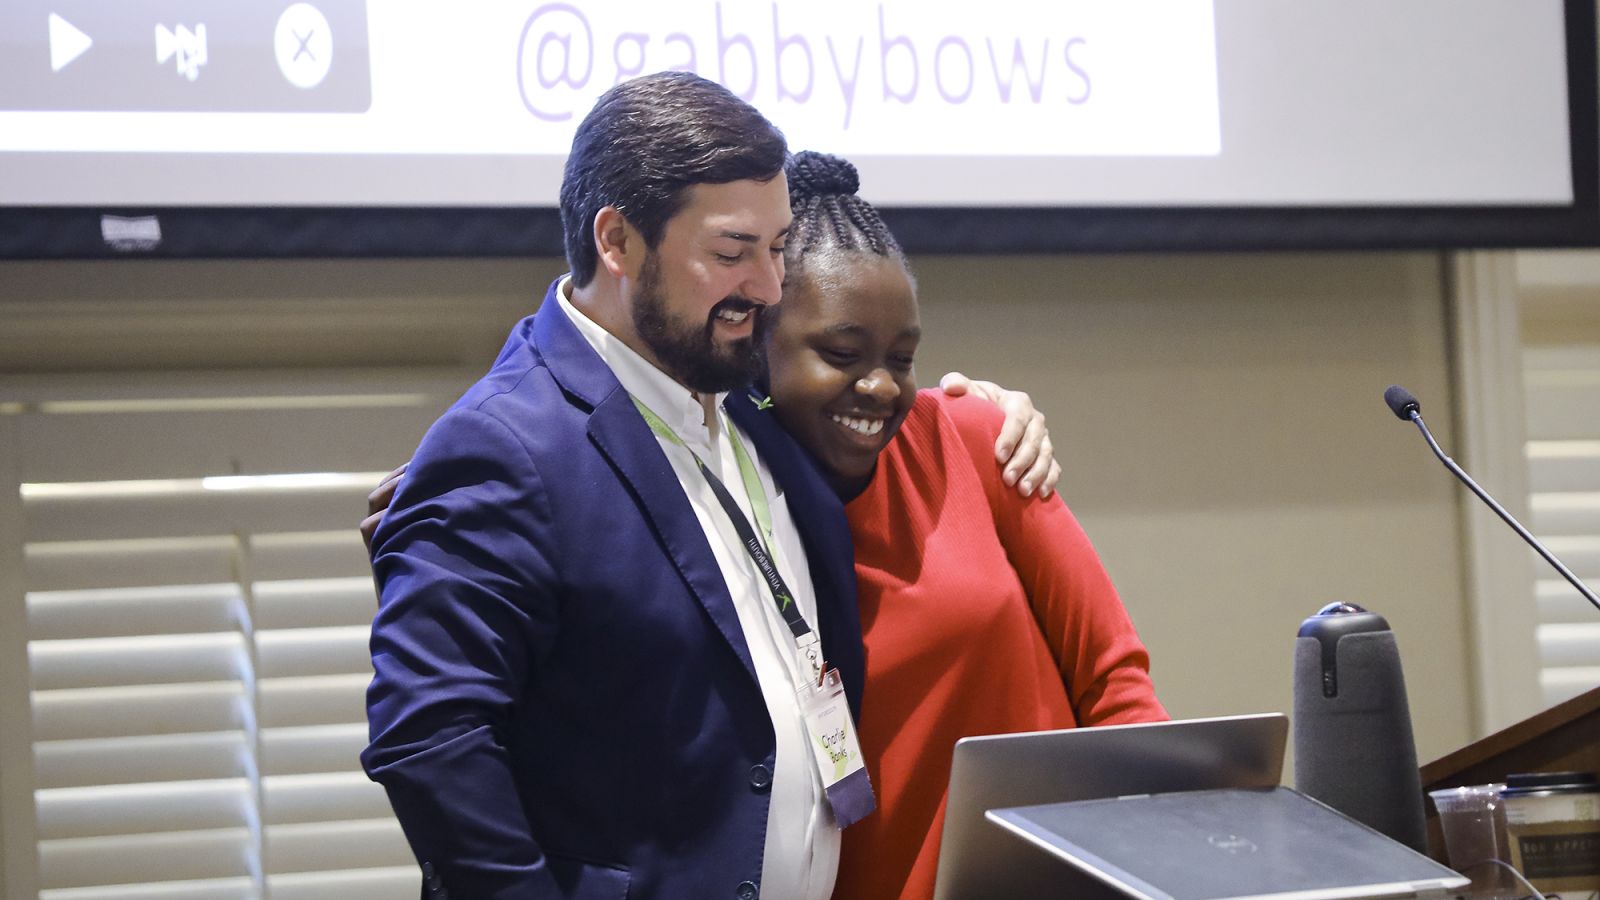 Charlie Banks of VentureSouth and entrepreneur Gabby Goodwin at the VentureSouth Summit at Furman in 2019. (Photo/Provided)